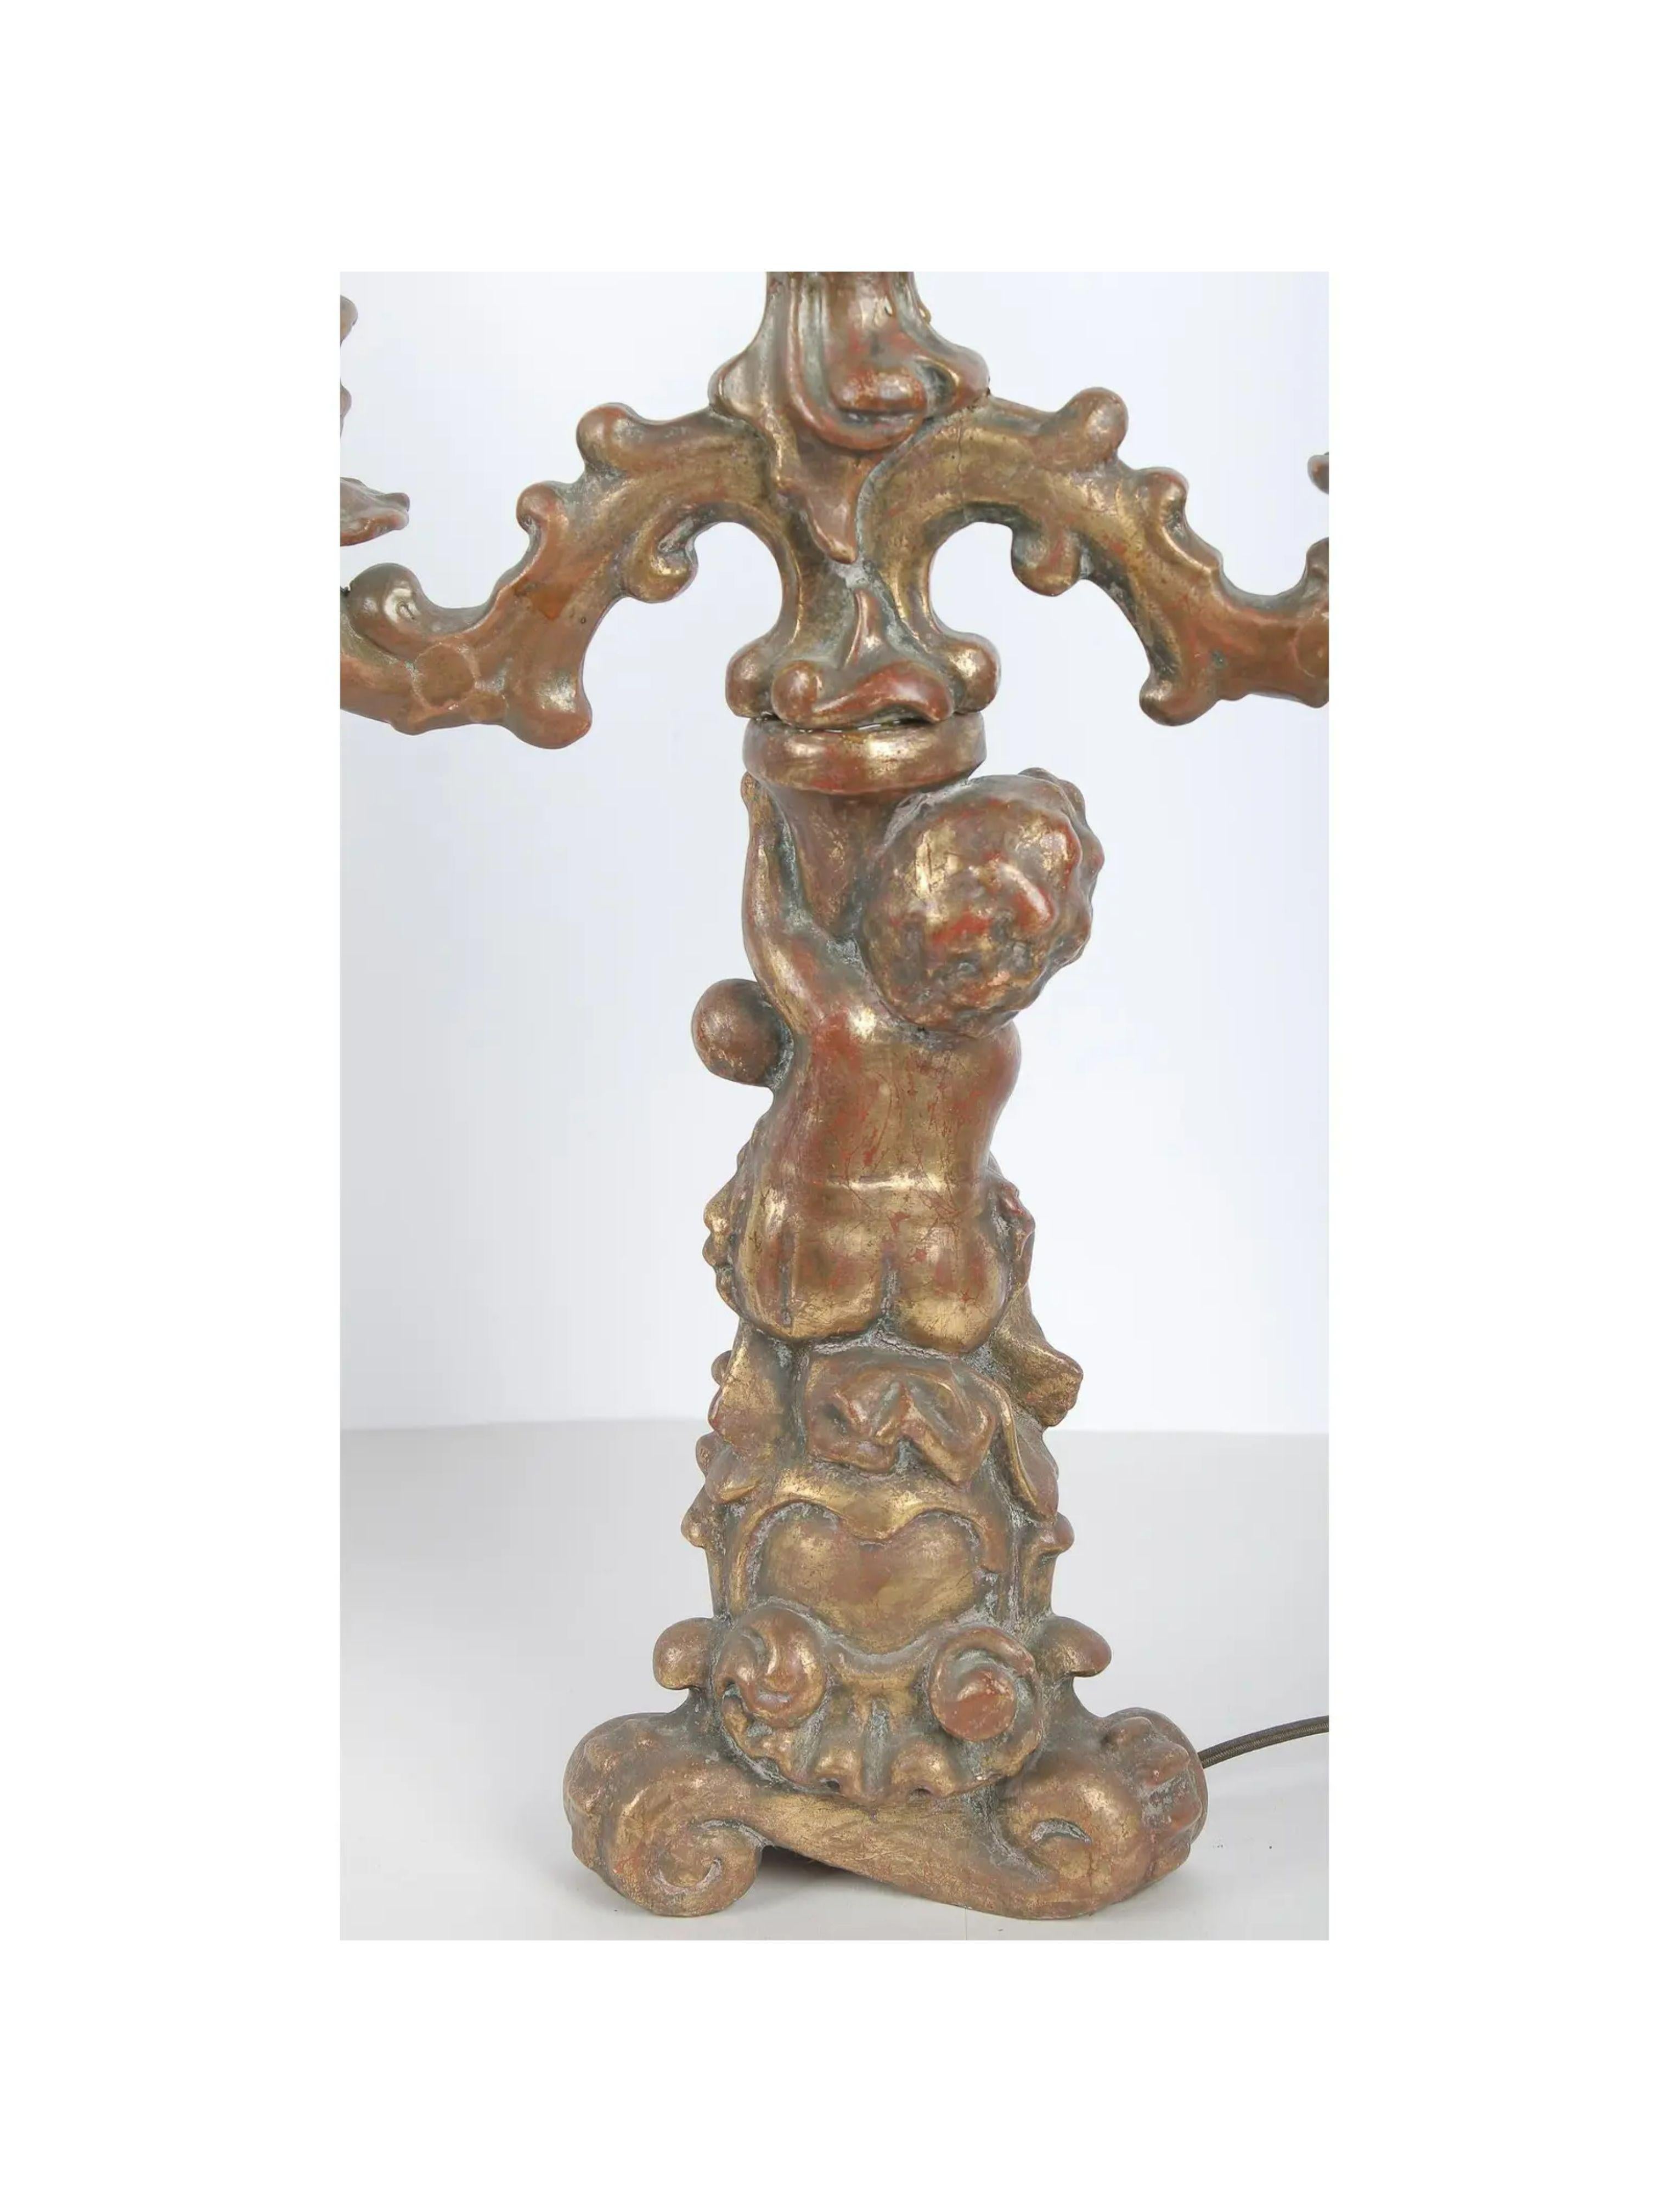 Pair of Antique Figural Nude Putti Gilt Wood Candelabra Lamp. Height to the top of the base is 20 inches.

Additional information: 
Materials: Wood
Color: Gold
Period: Early 20th Century
Styles: Figurative, French
Lamp Shade: Not Included
Power